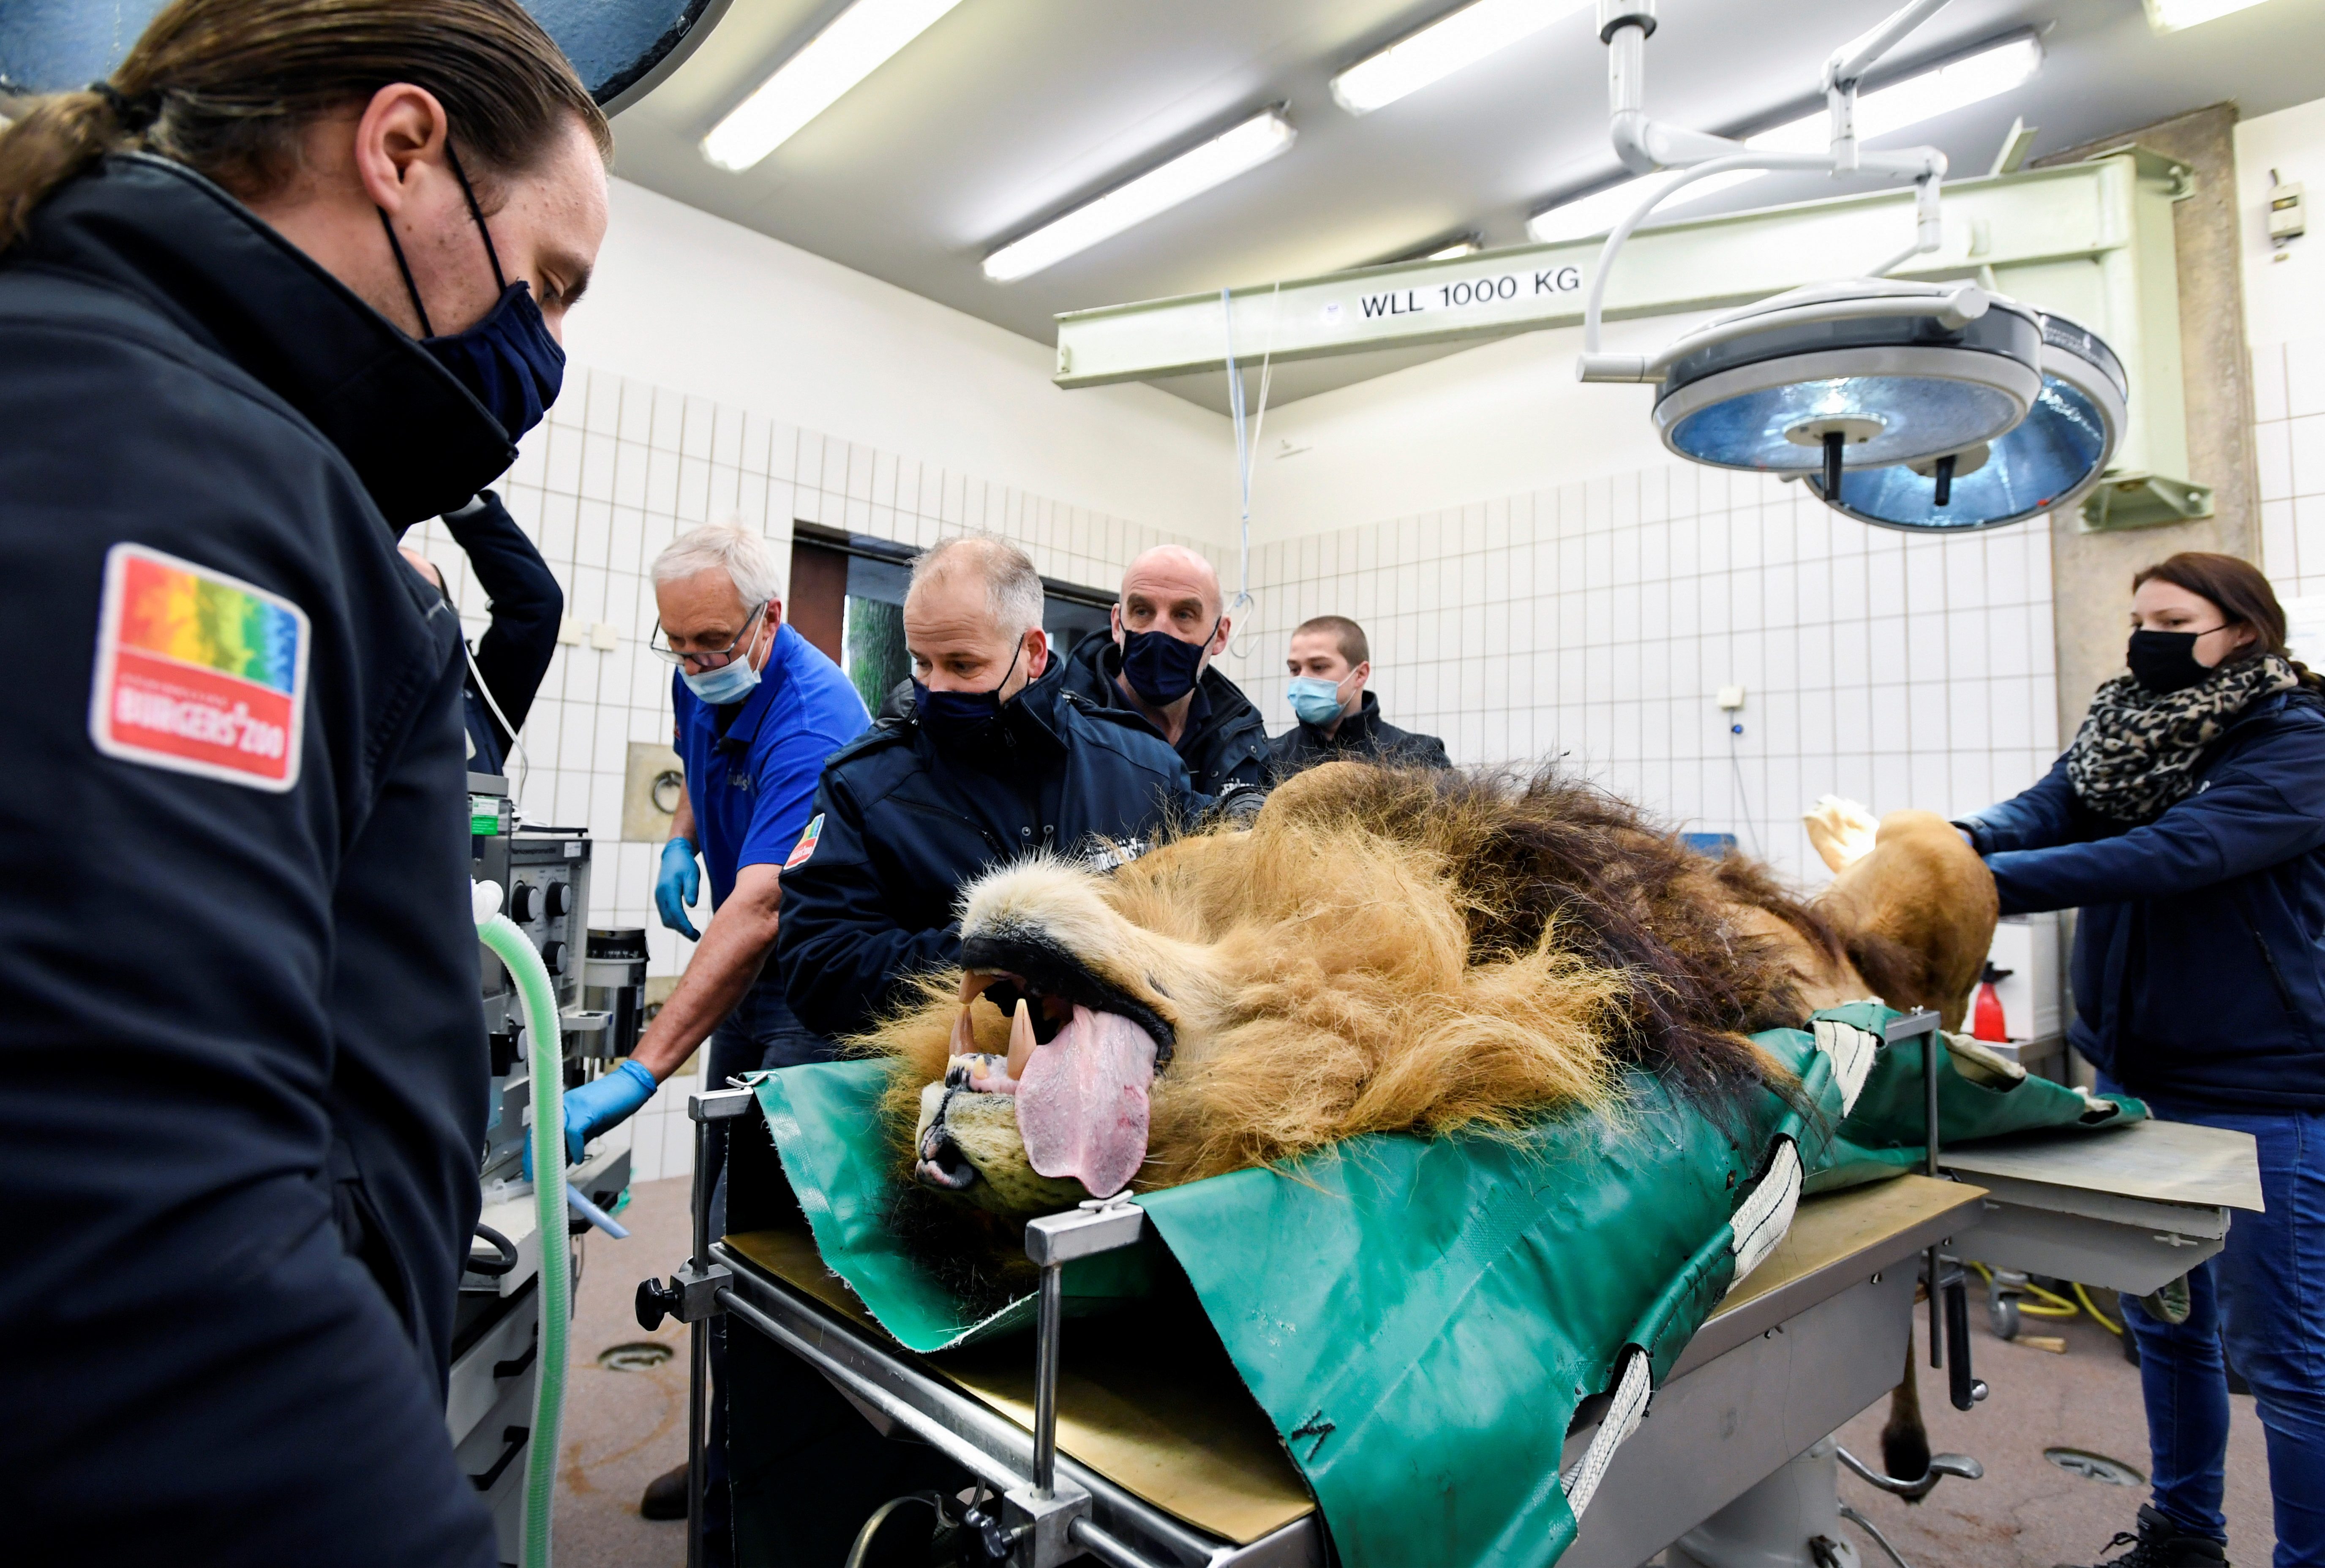 Lion has vasectomy after siring 5 cubs in a year